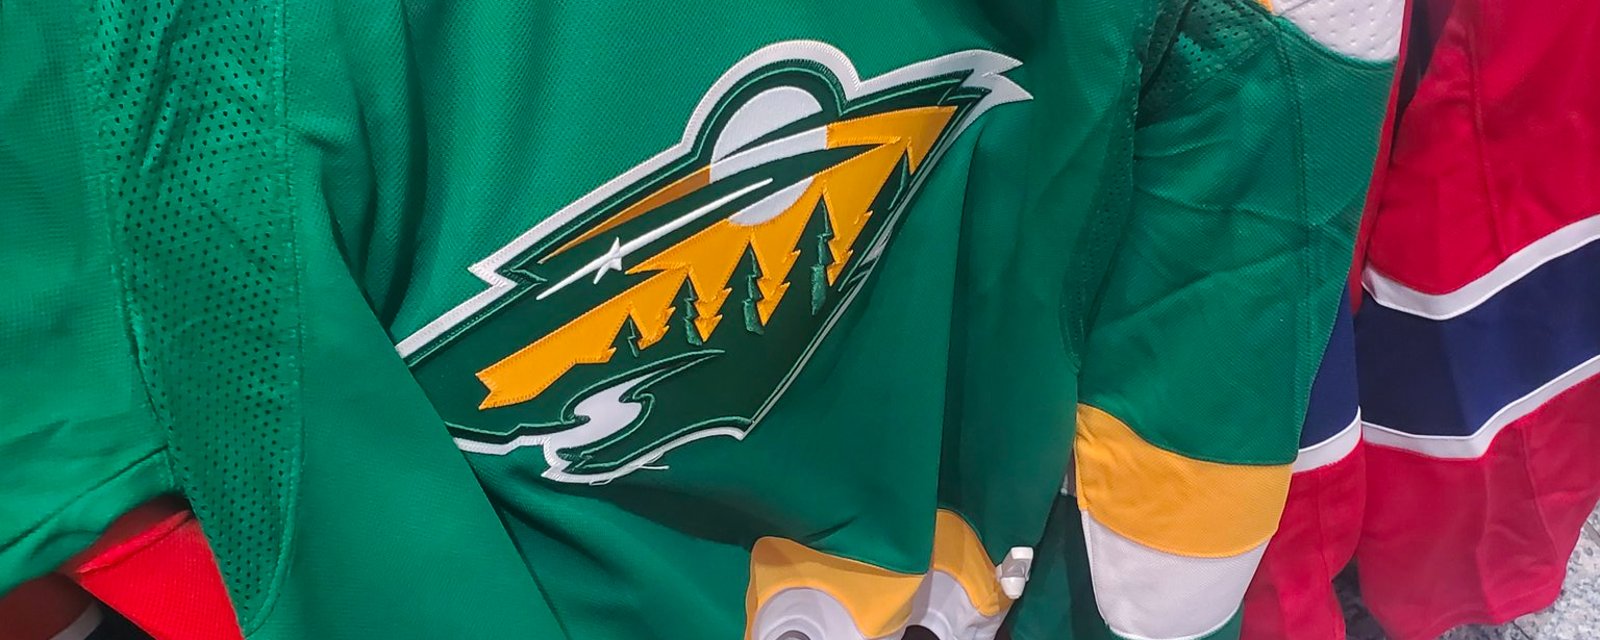 Wild third jersey has leaked and Fanatics gets ripped to shreds!